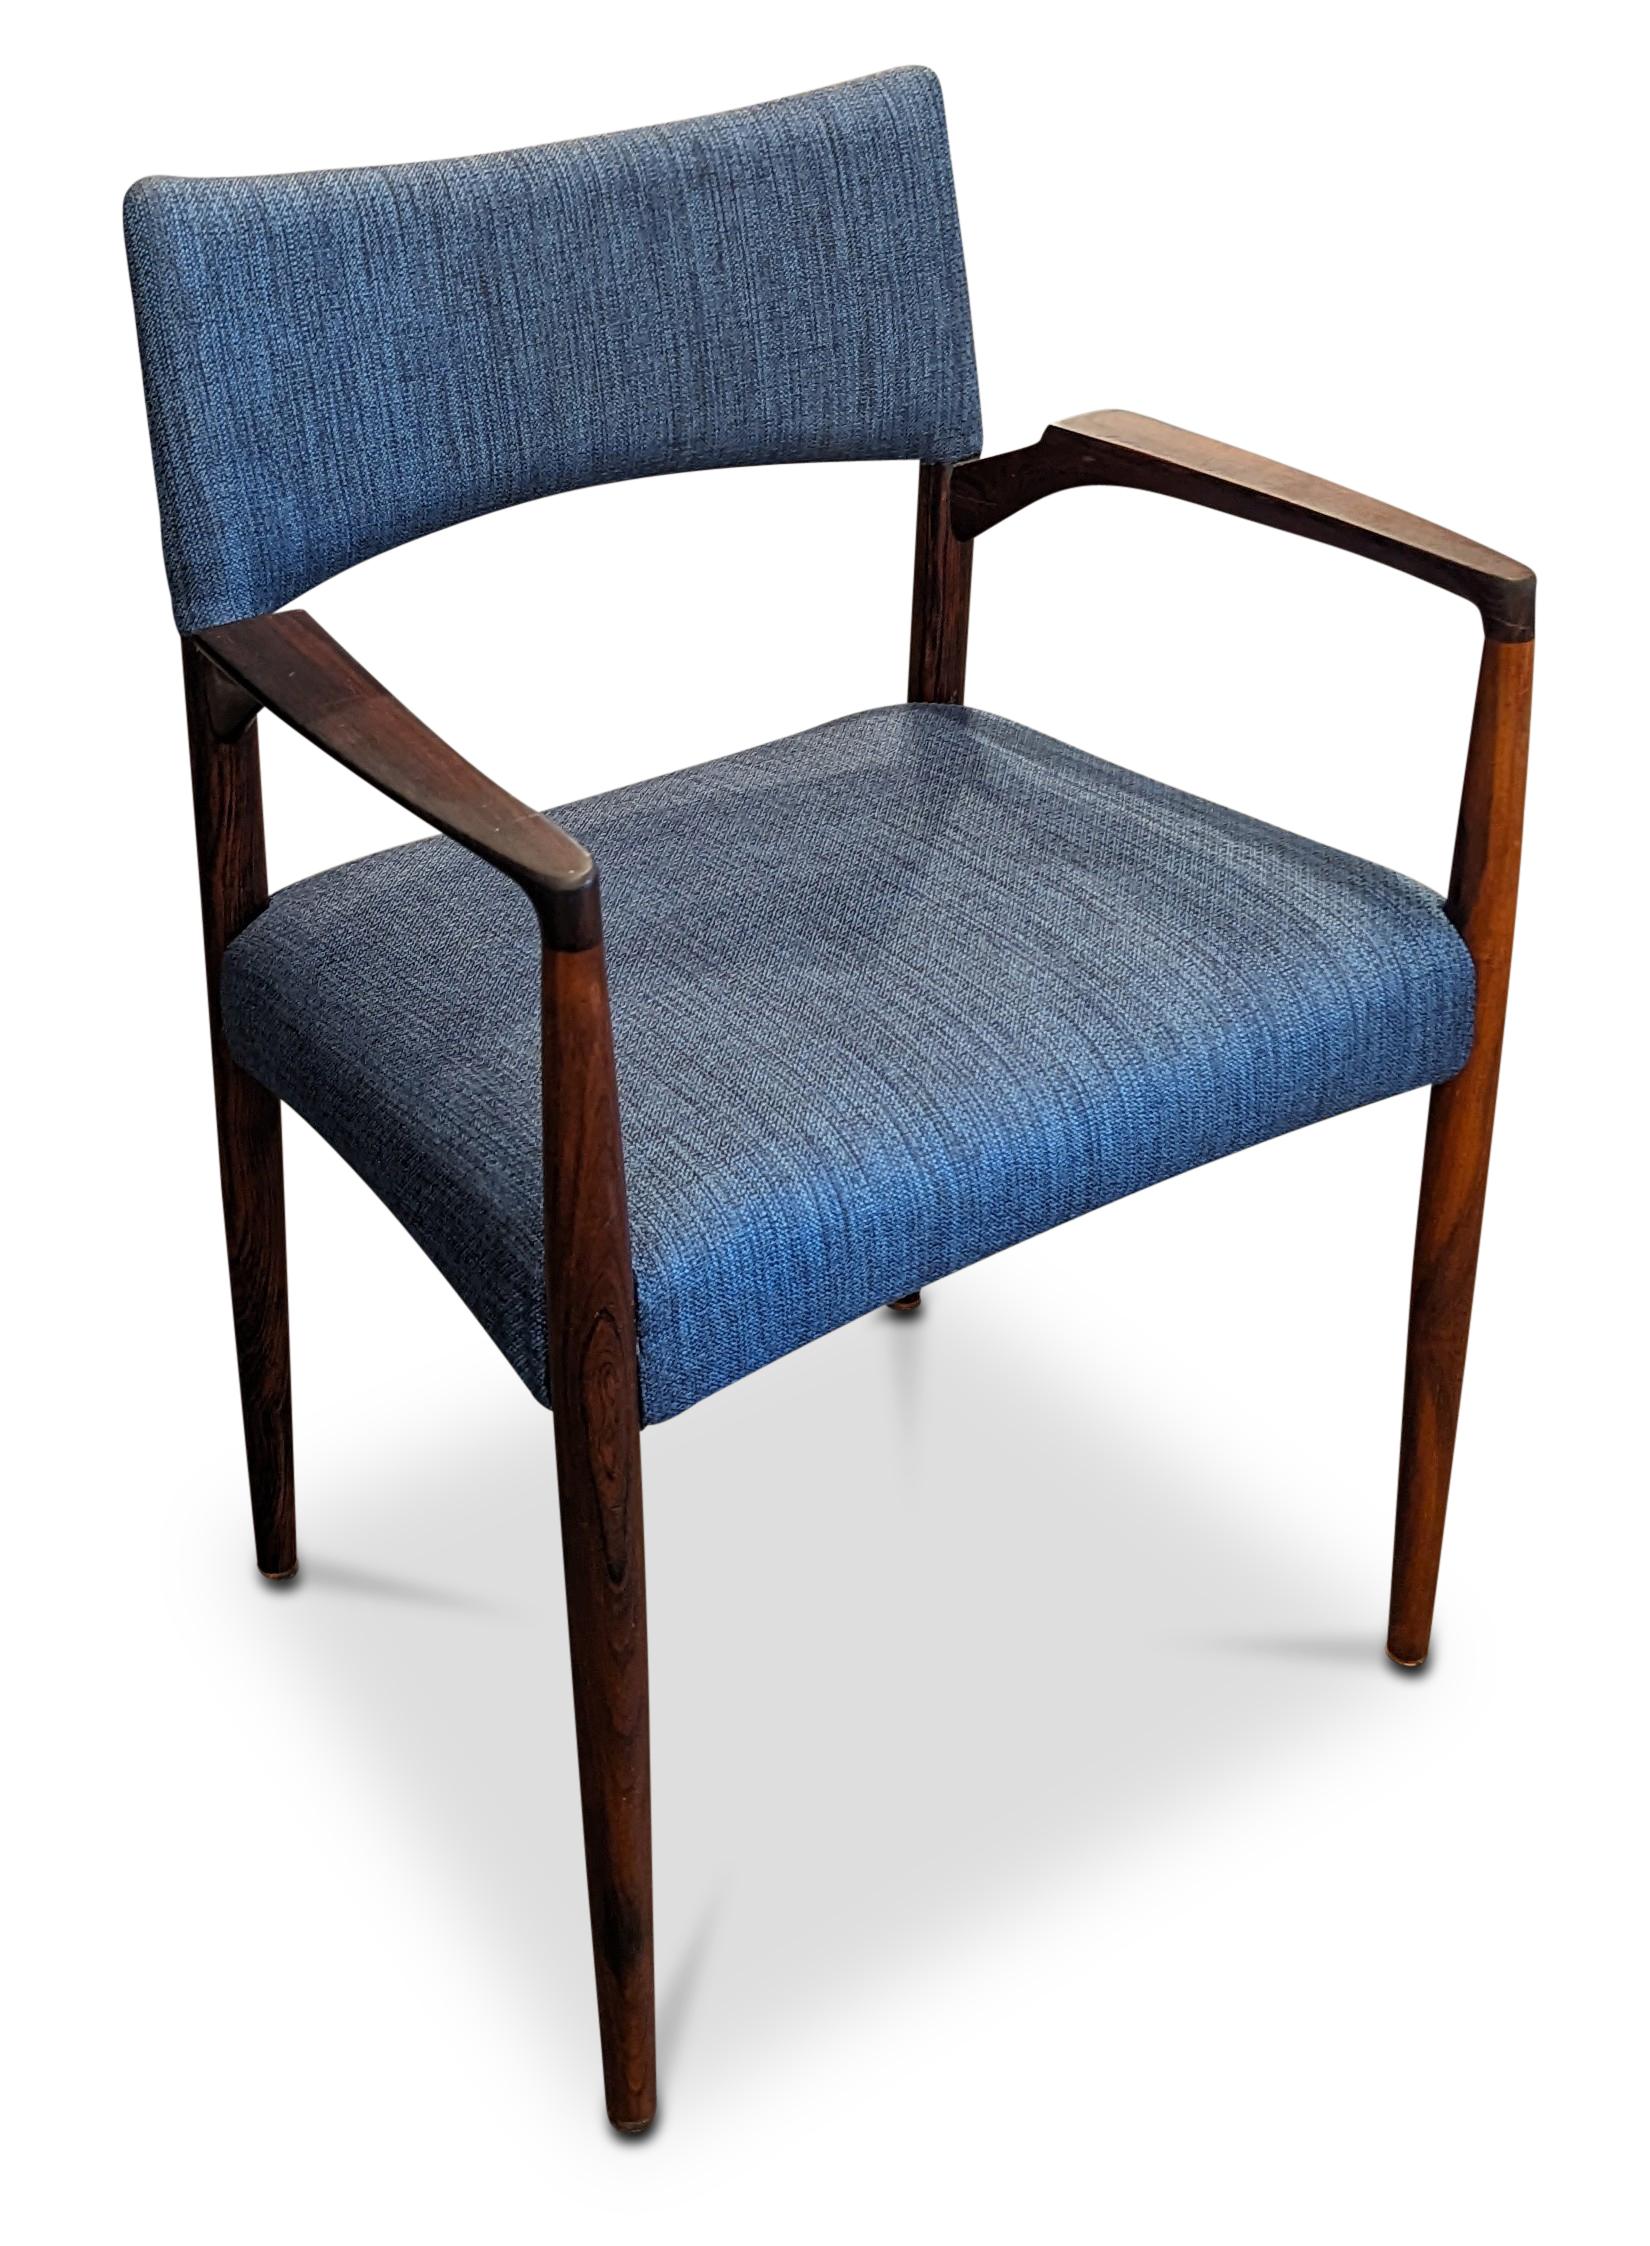 Mid-20th Century 6 Aksel Bender Madsen Rosewood Dining Chairs - 072342 Vintage Danish Mid Century